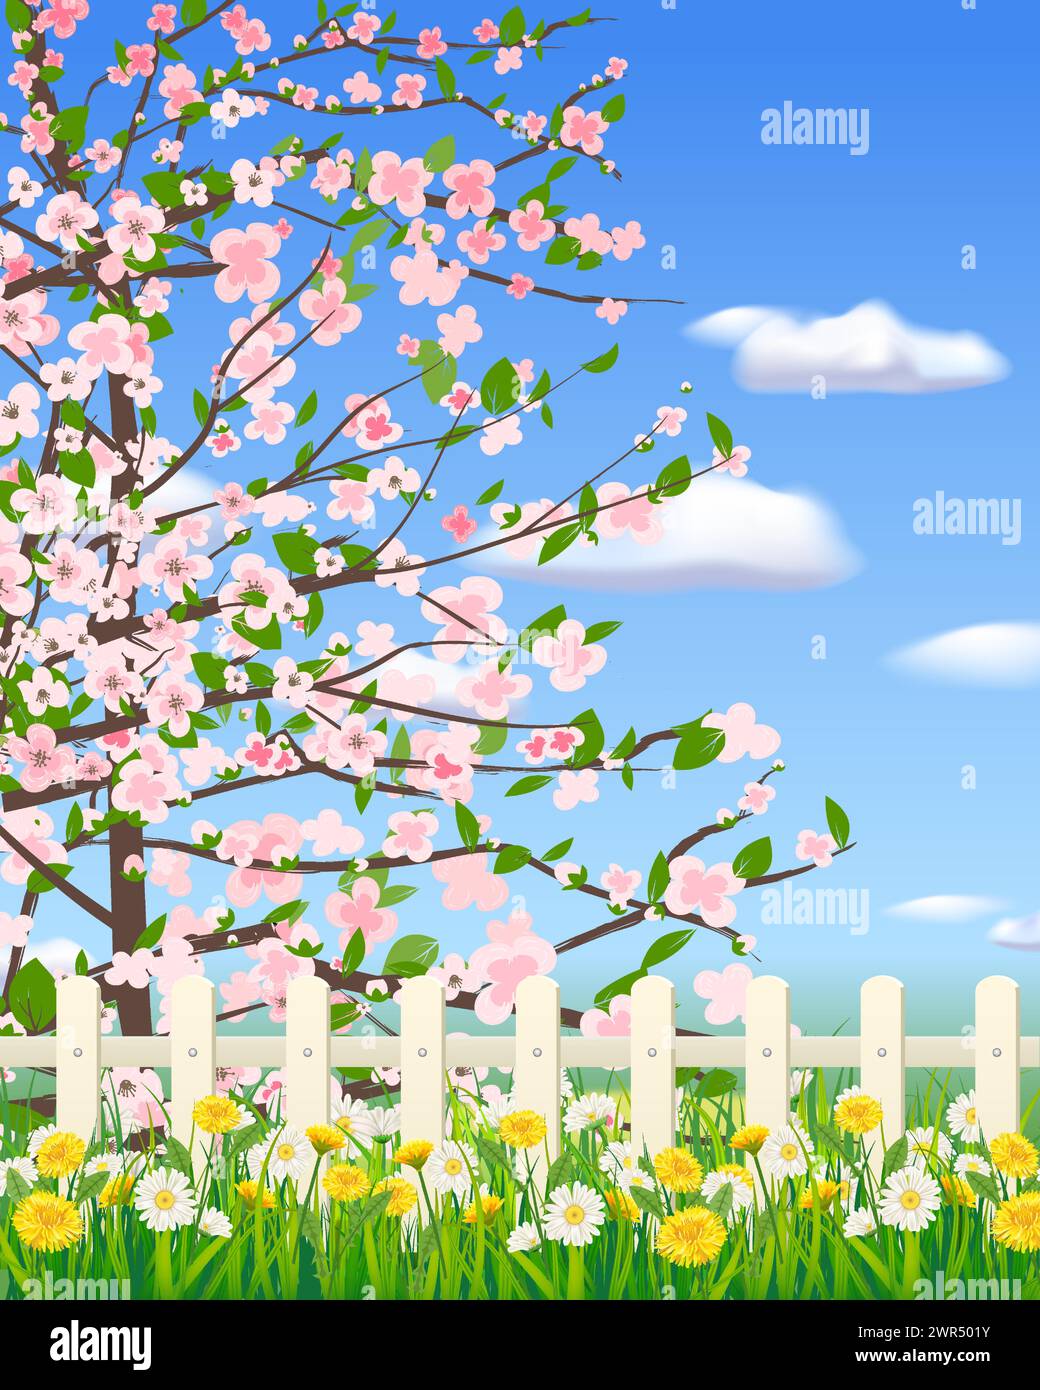 Spring landscape field green grass, blooming tree, daisy, dandelion flowers, white fence, clouds Stock Vector